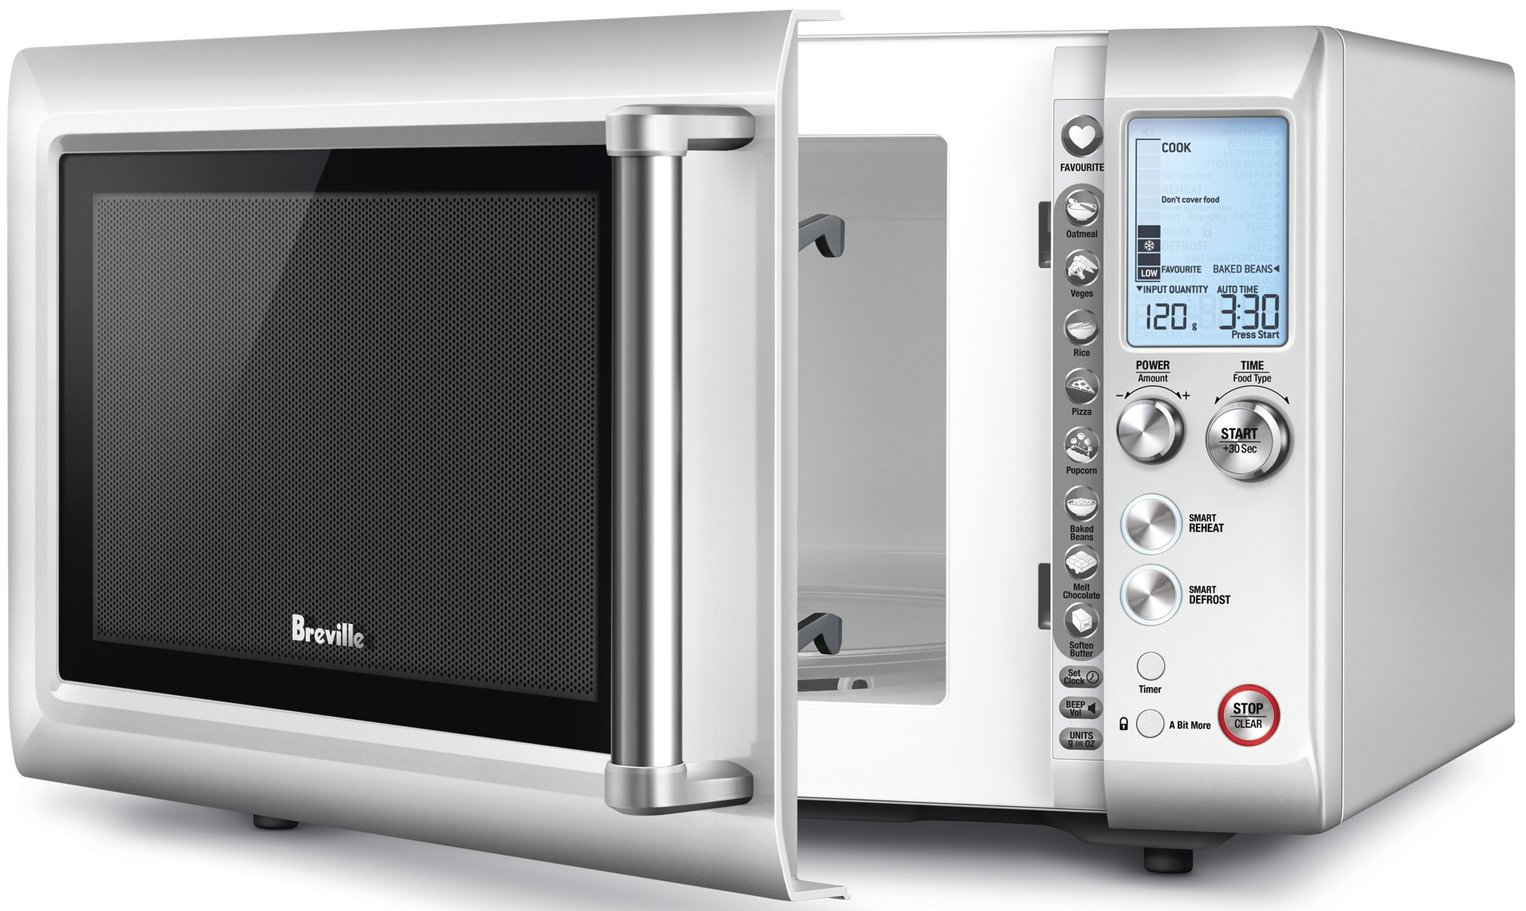 Innovative Cooking Solutions with the Breville Quick Touch Microwave Oven